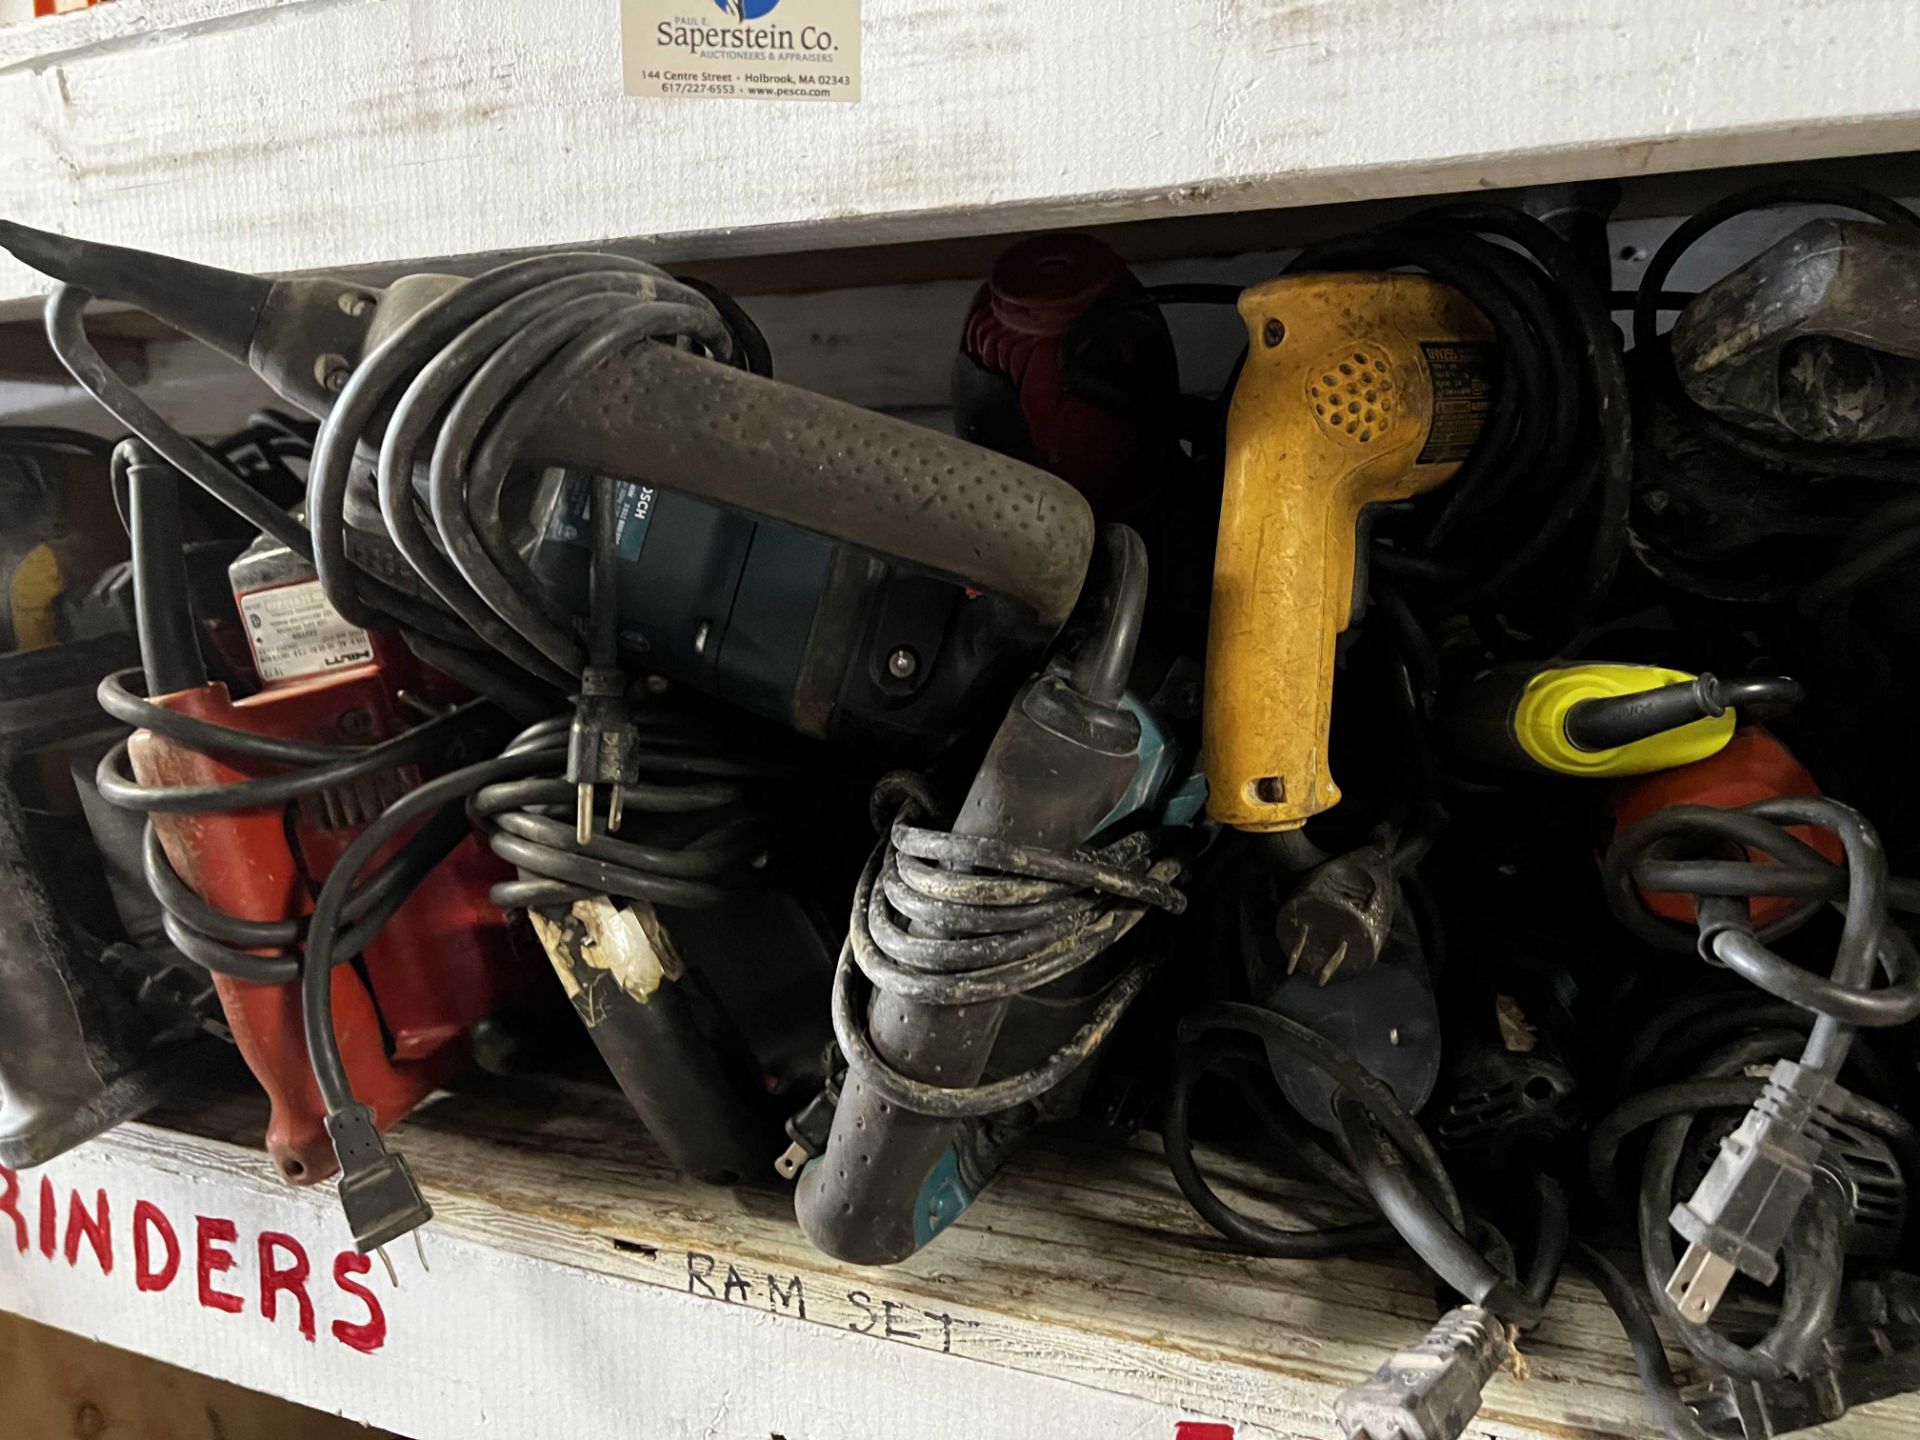 {LOT} Approx. 40 Corded Drills, Hammer Drills, Grinders, & Sanders on Shelf - Image 3 of 5